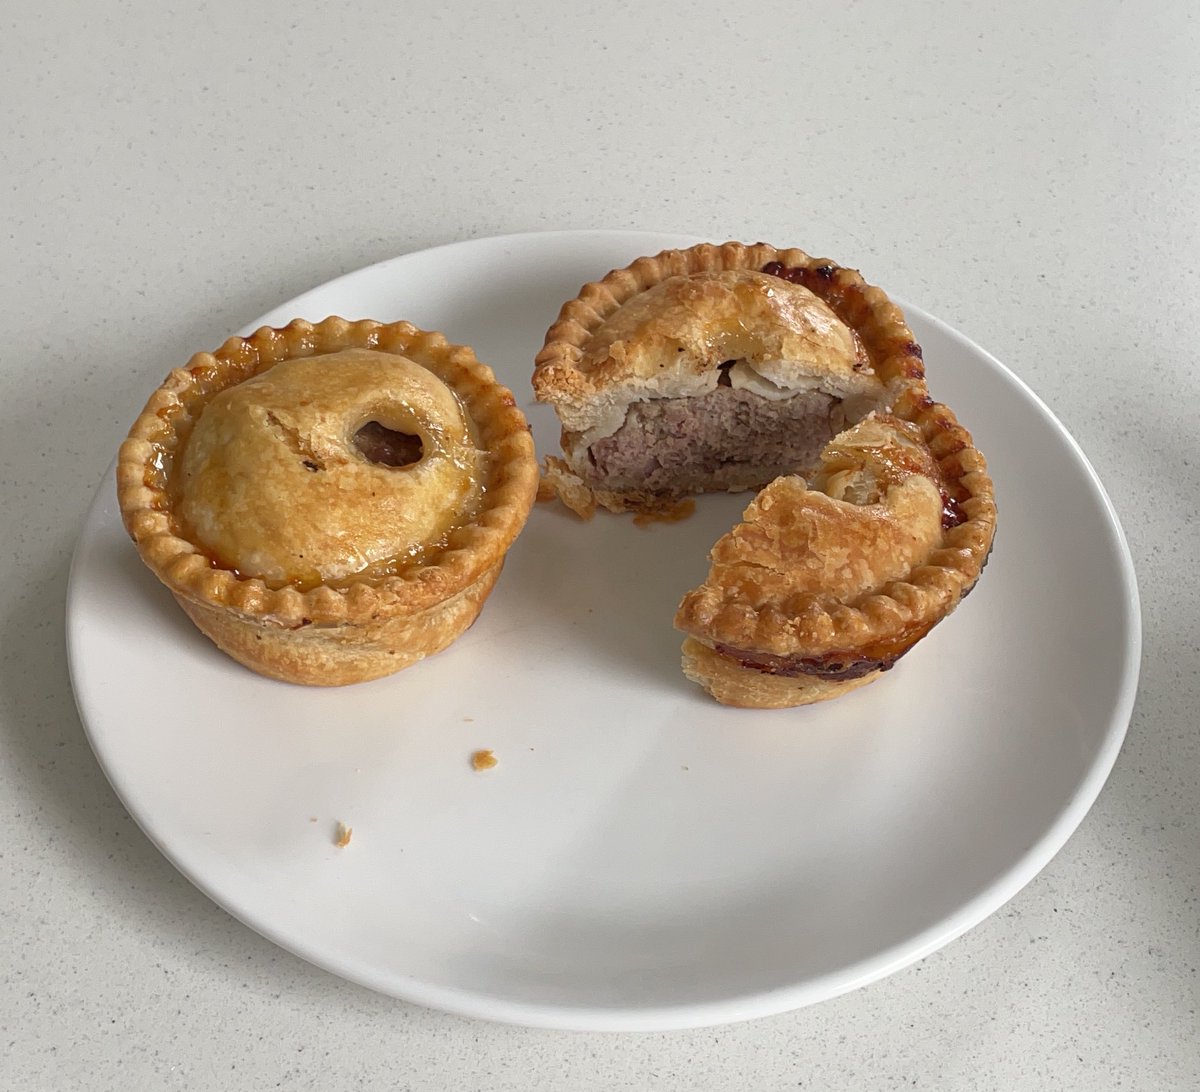 #nationalpieweek for us Birkenhead lads means New Ferry and Pearson’s pork pies.